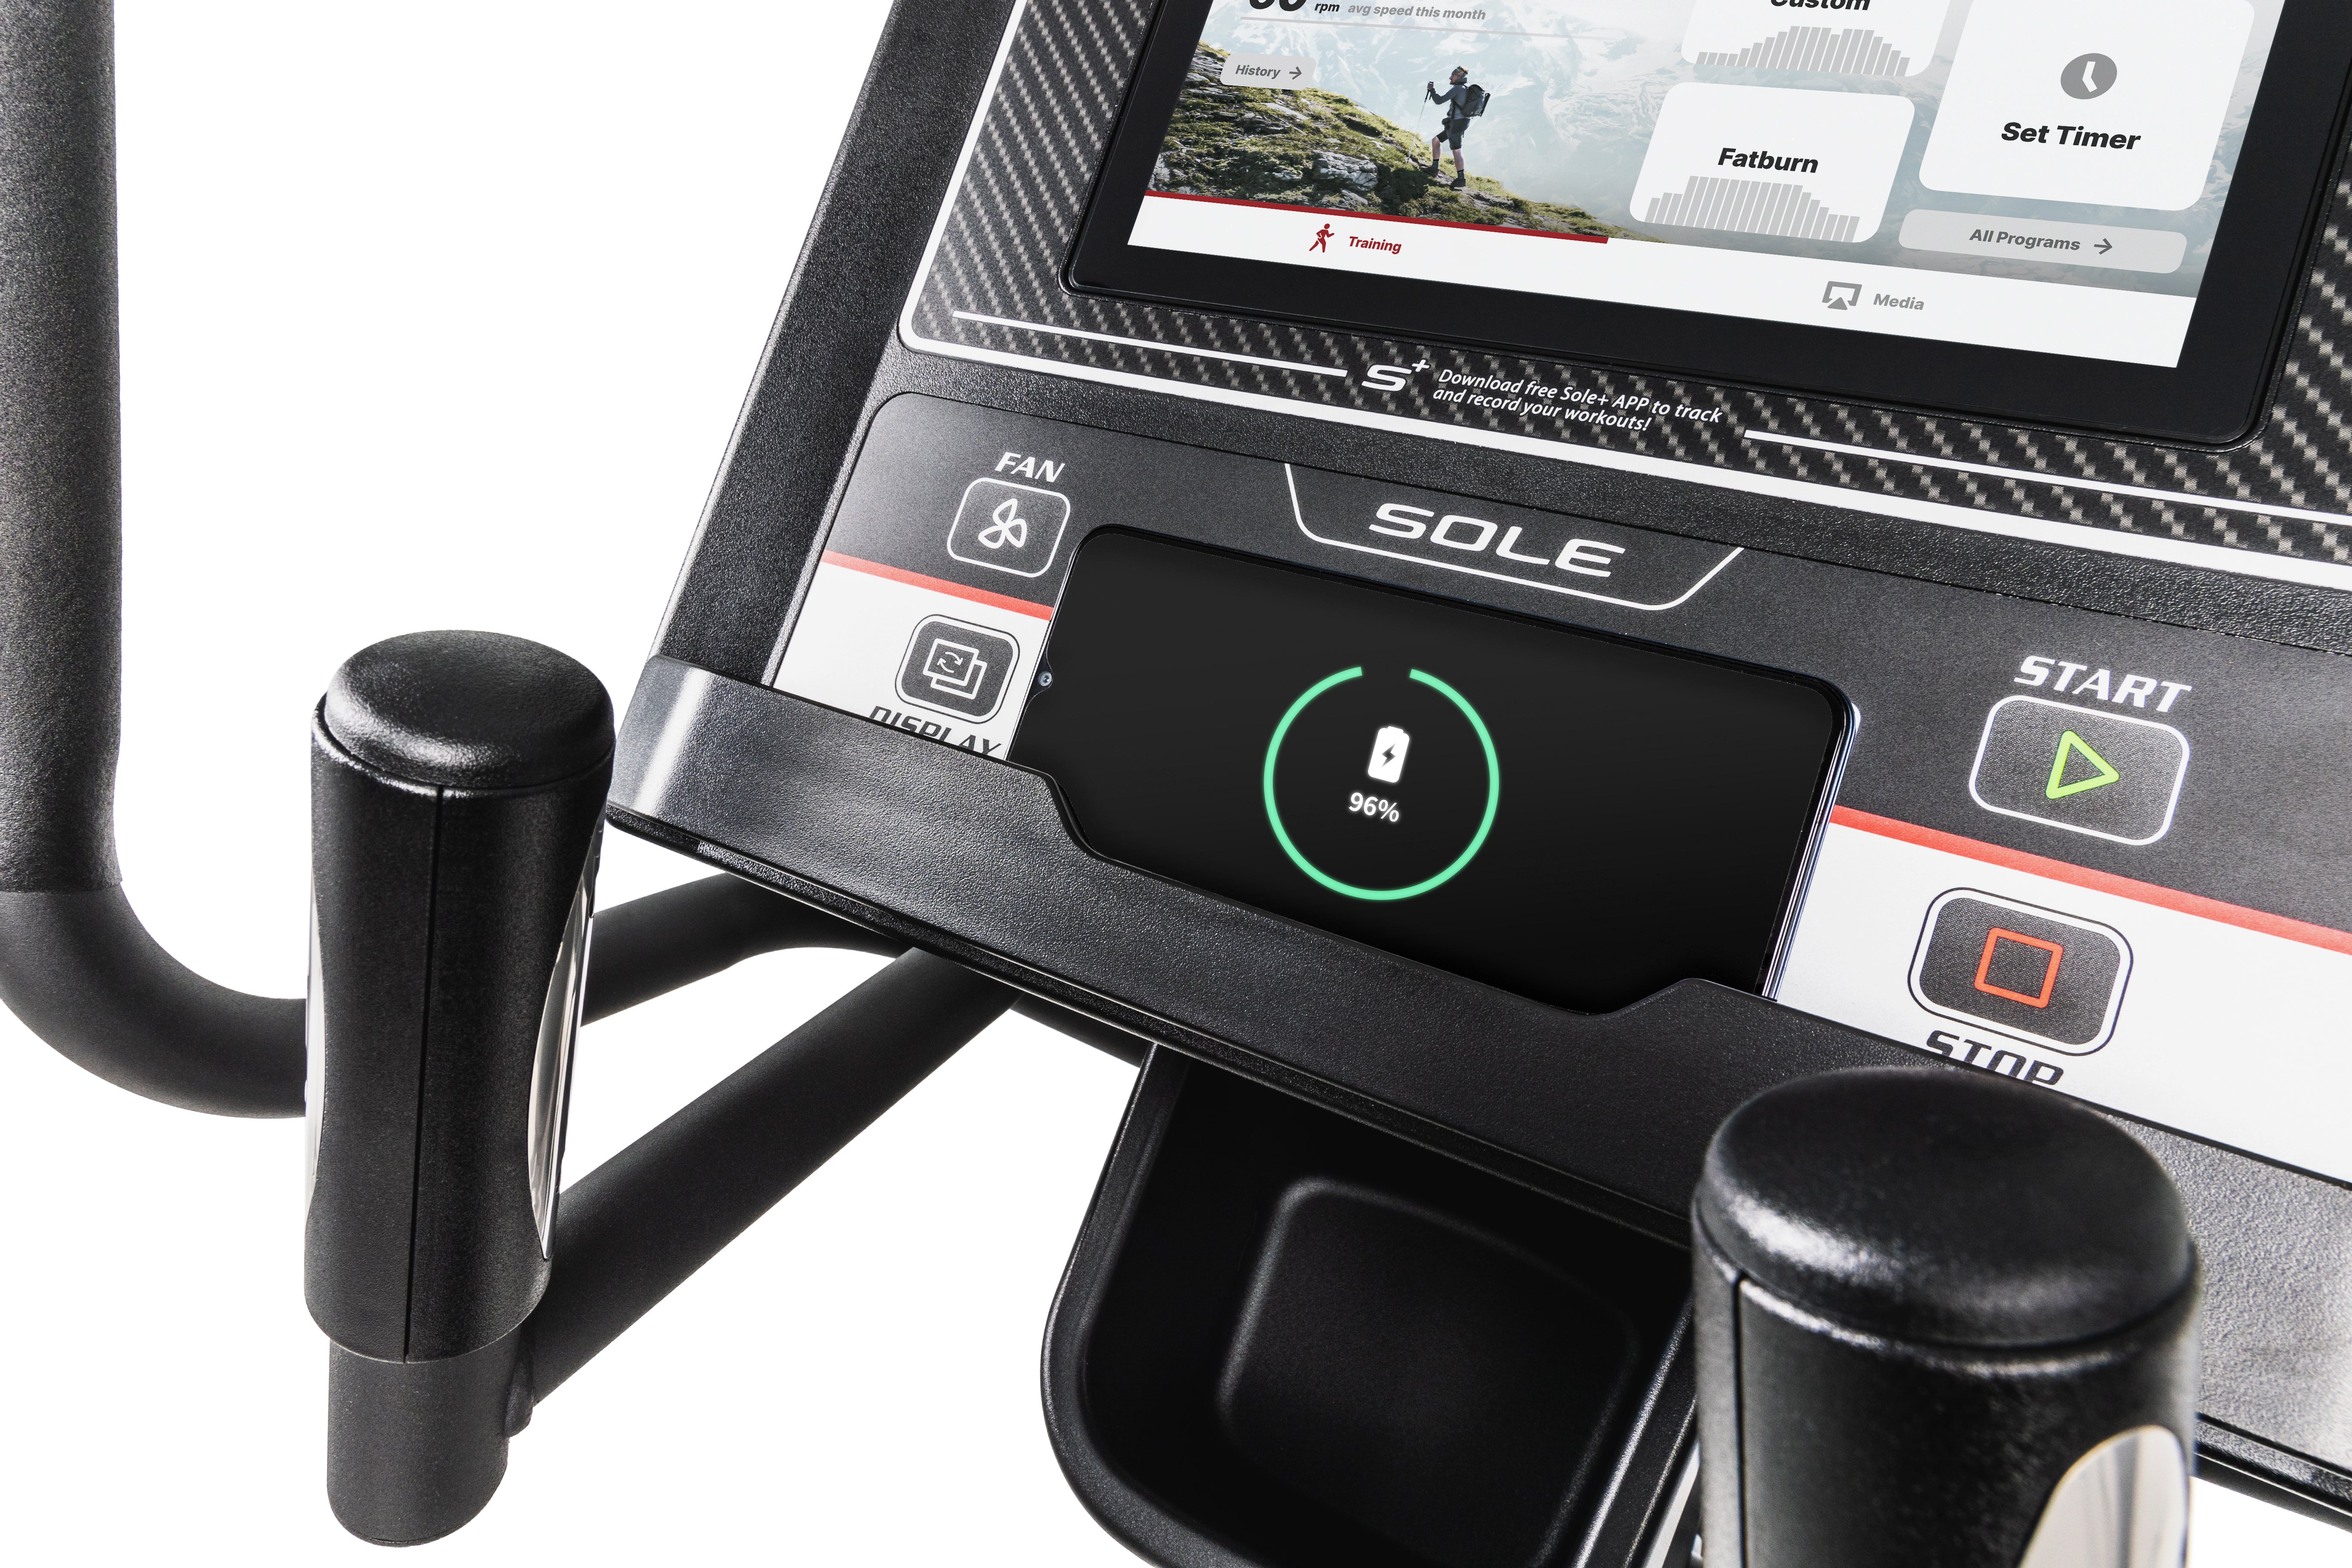 Front view of the Sole E35 elliptical machine with emphasis on its LCD display, ergonomically designed handlebars, and stable foot pedals.